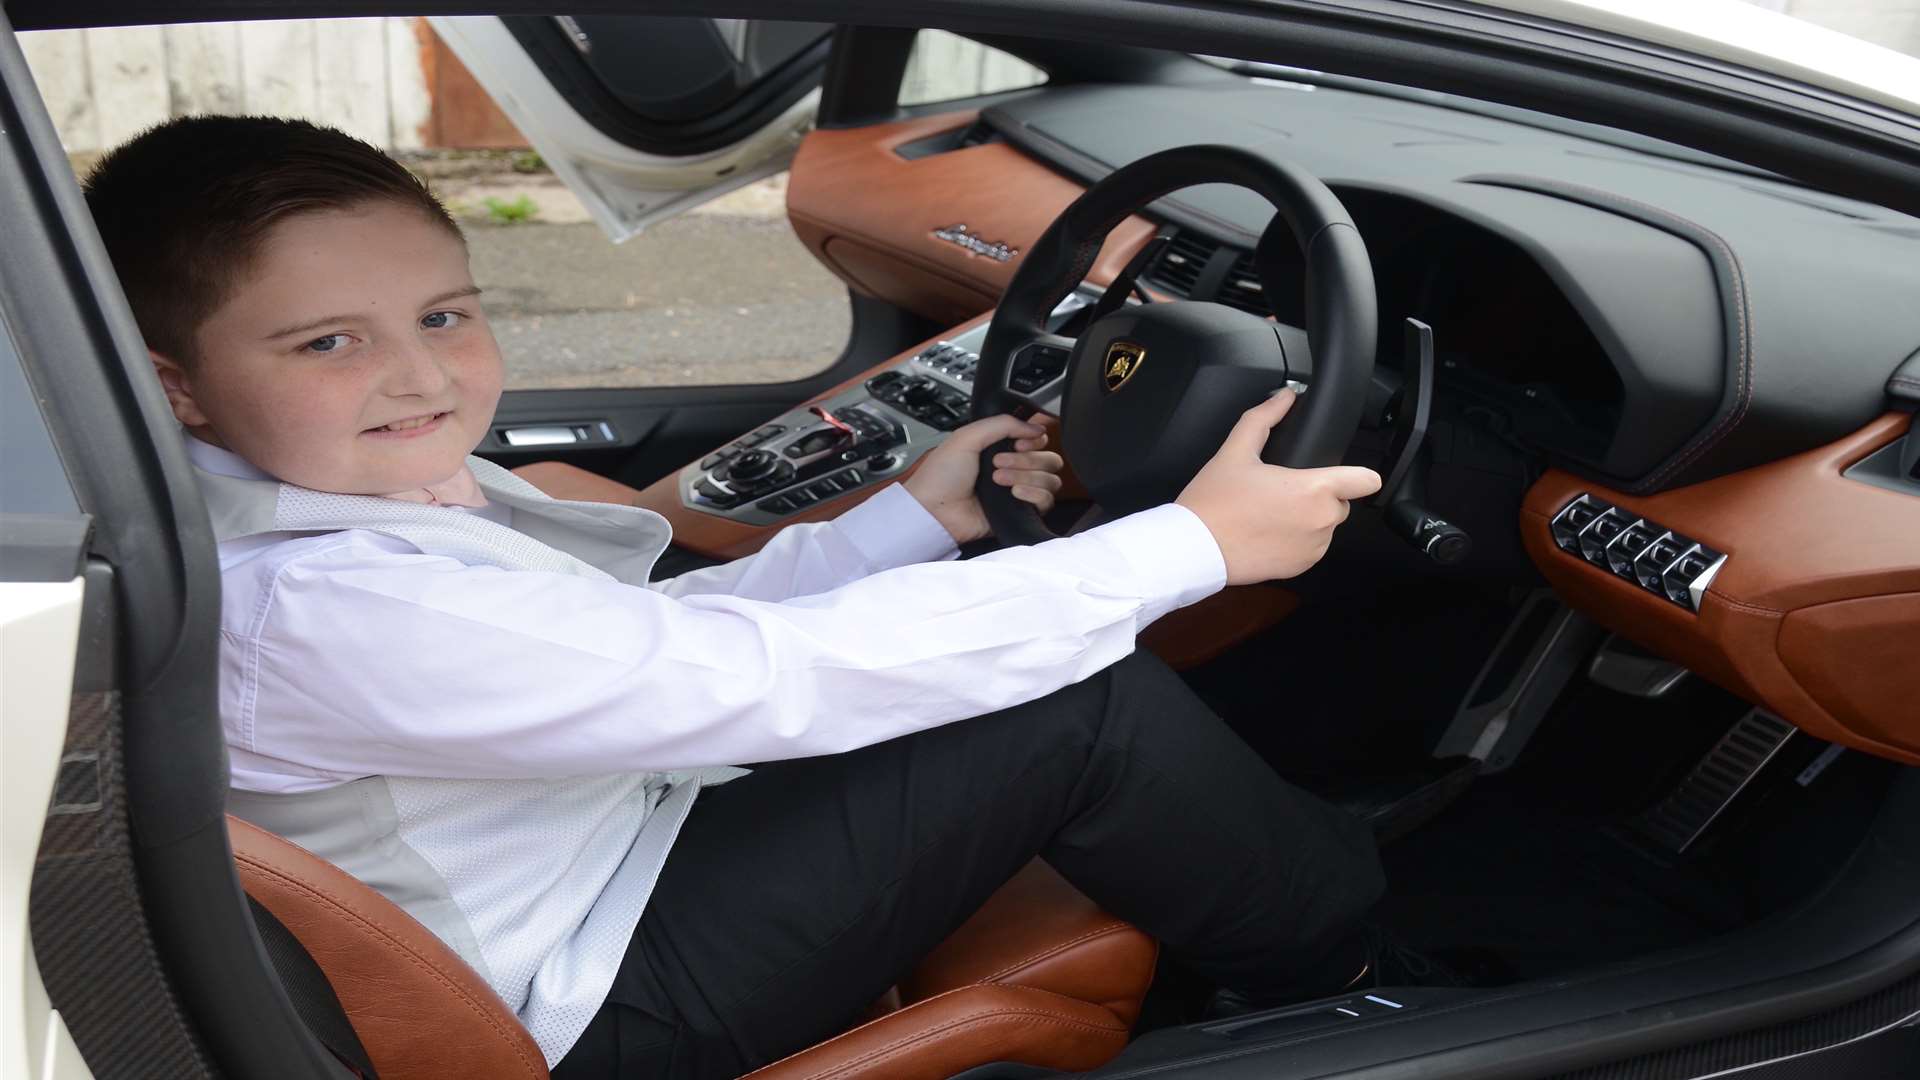 The youngster samples life in the driving seat